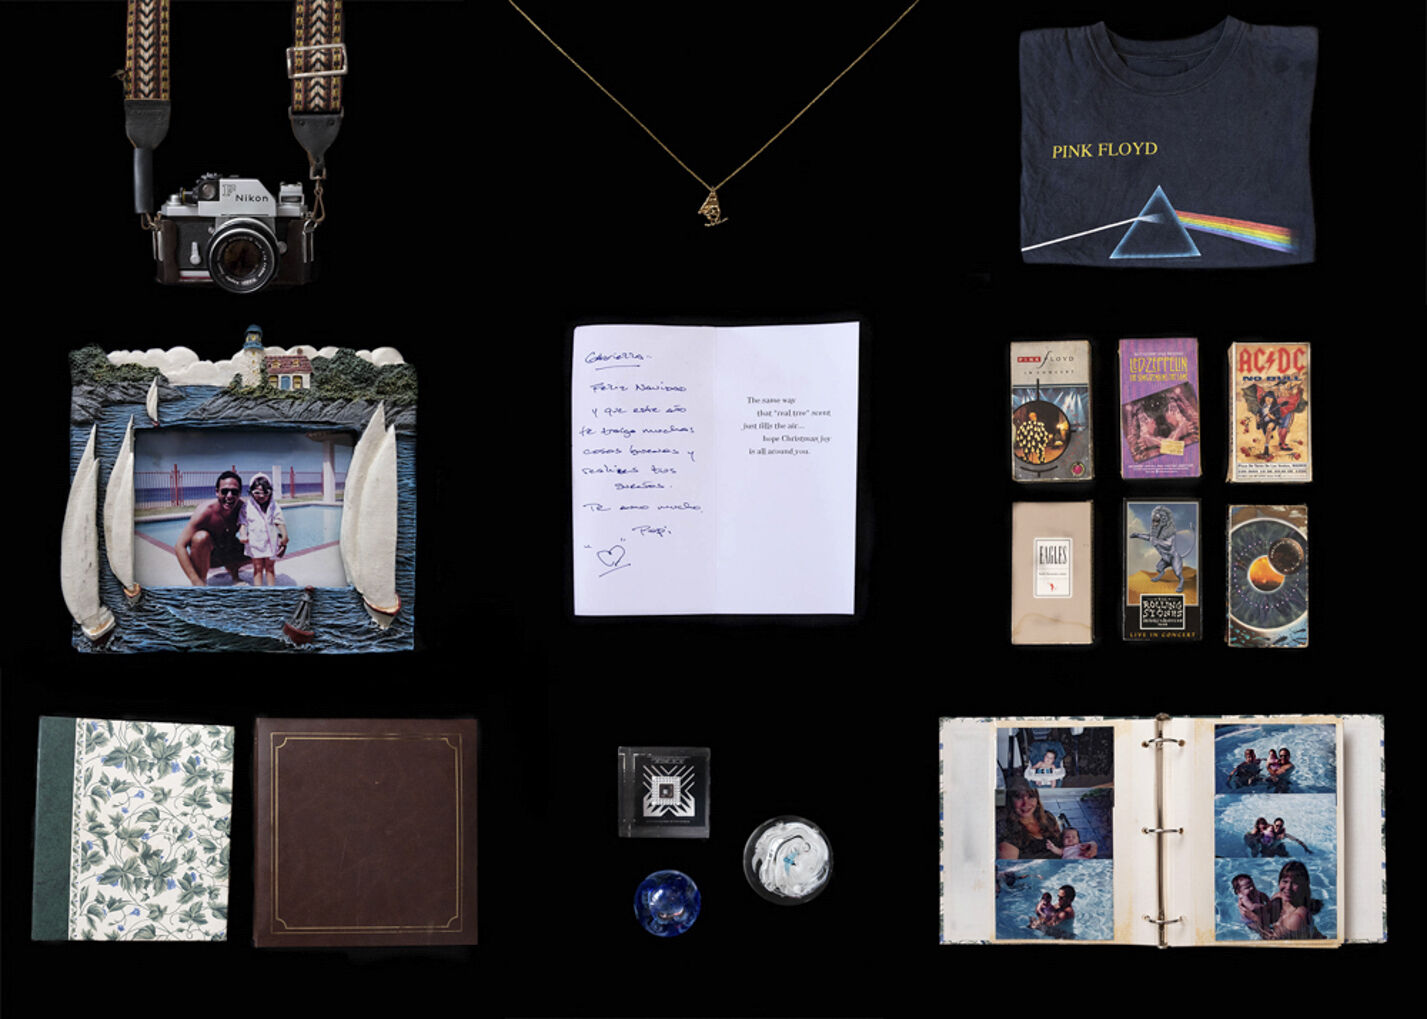 A single-lens reflex camera, a necklace, a T-shirt, a photo frame, cardstock paper, cassette tapes, photo albums and paper weights against a black background.